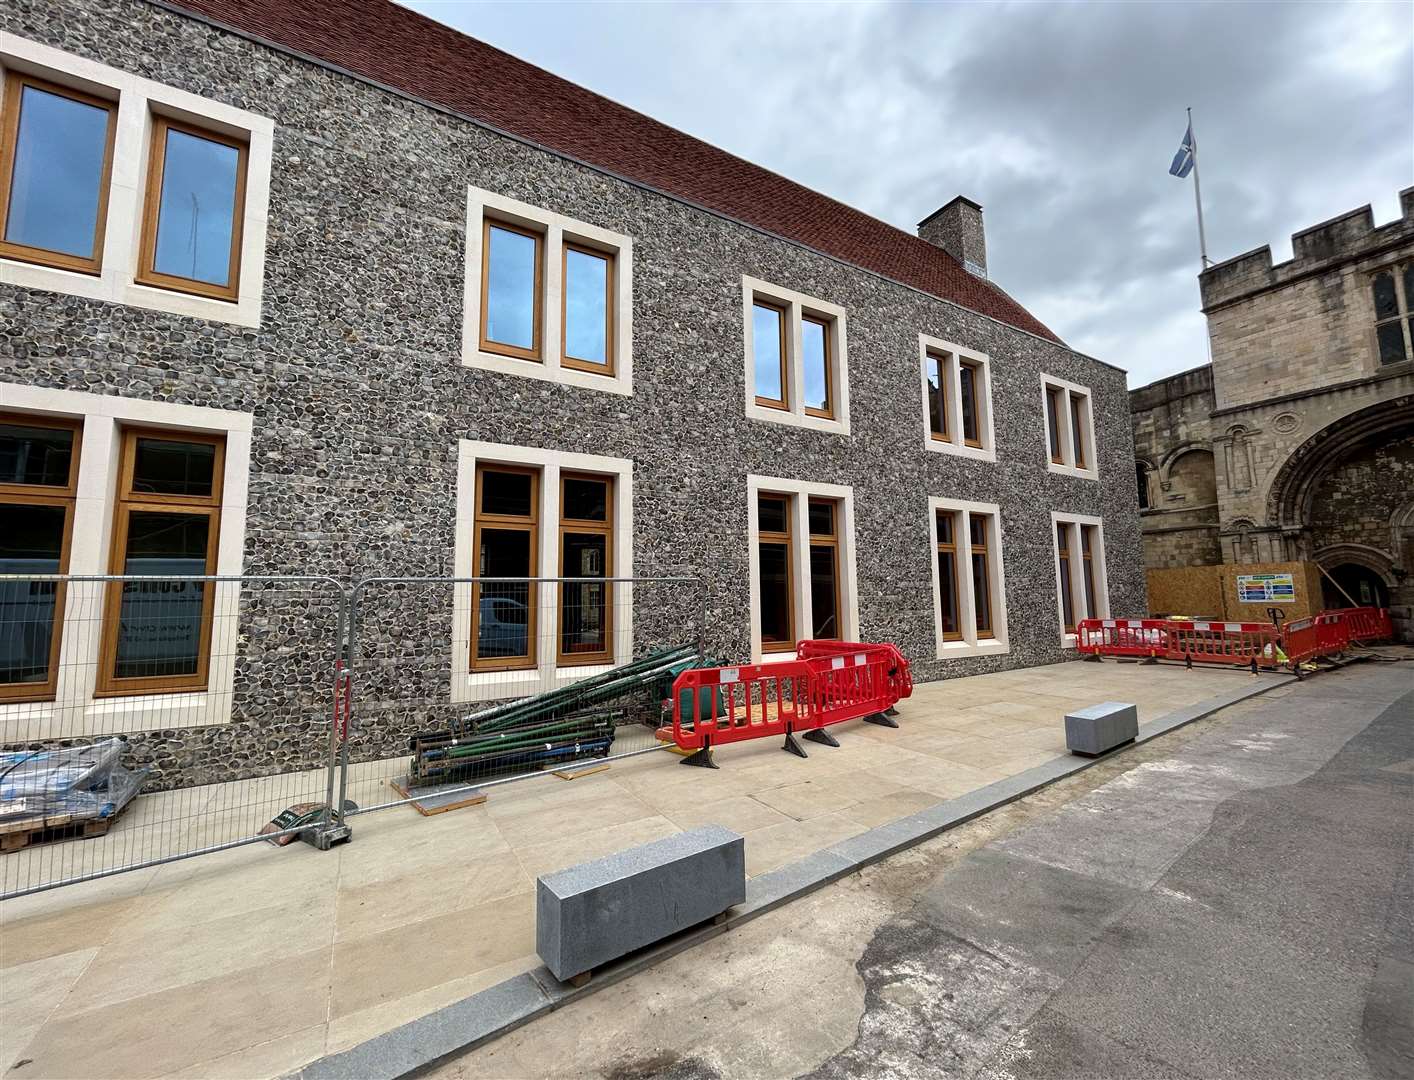 The new Science Building is being built at King's School Canterbury